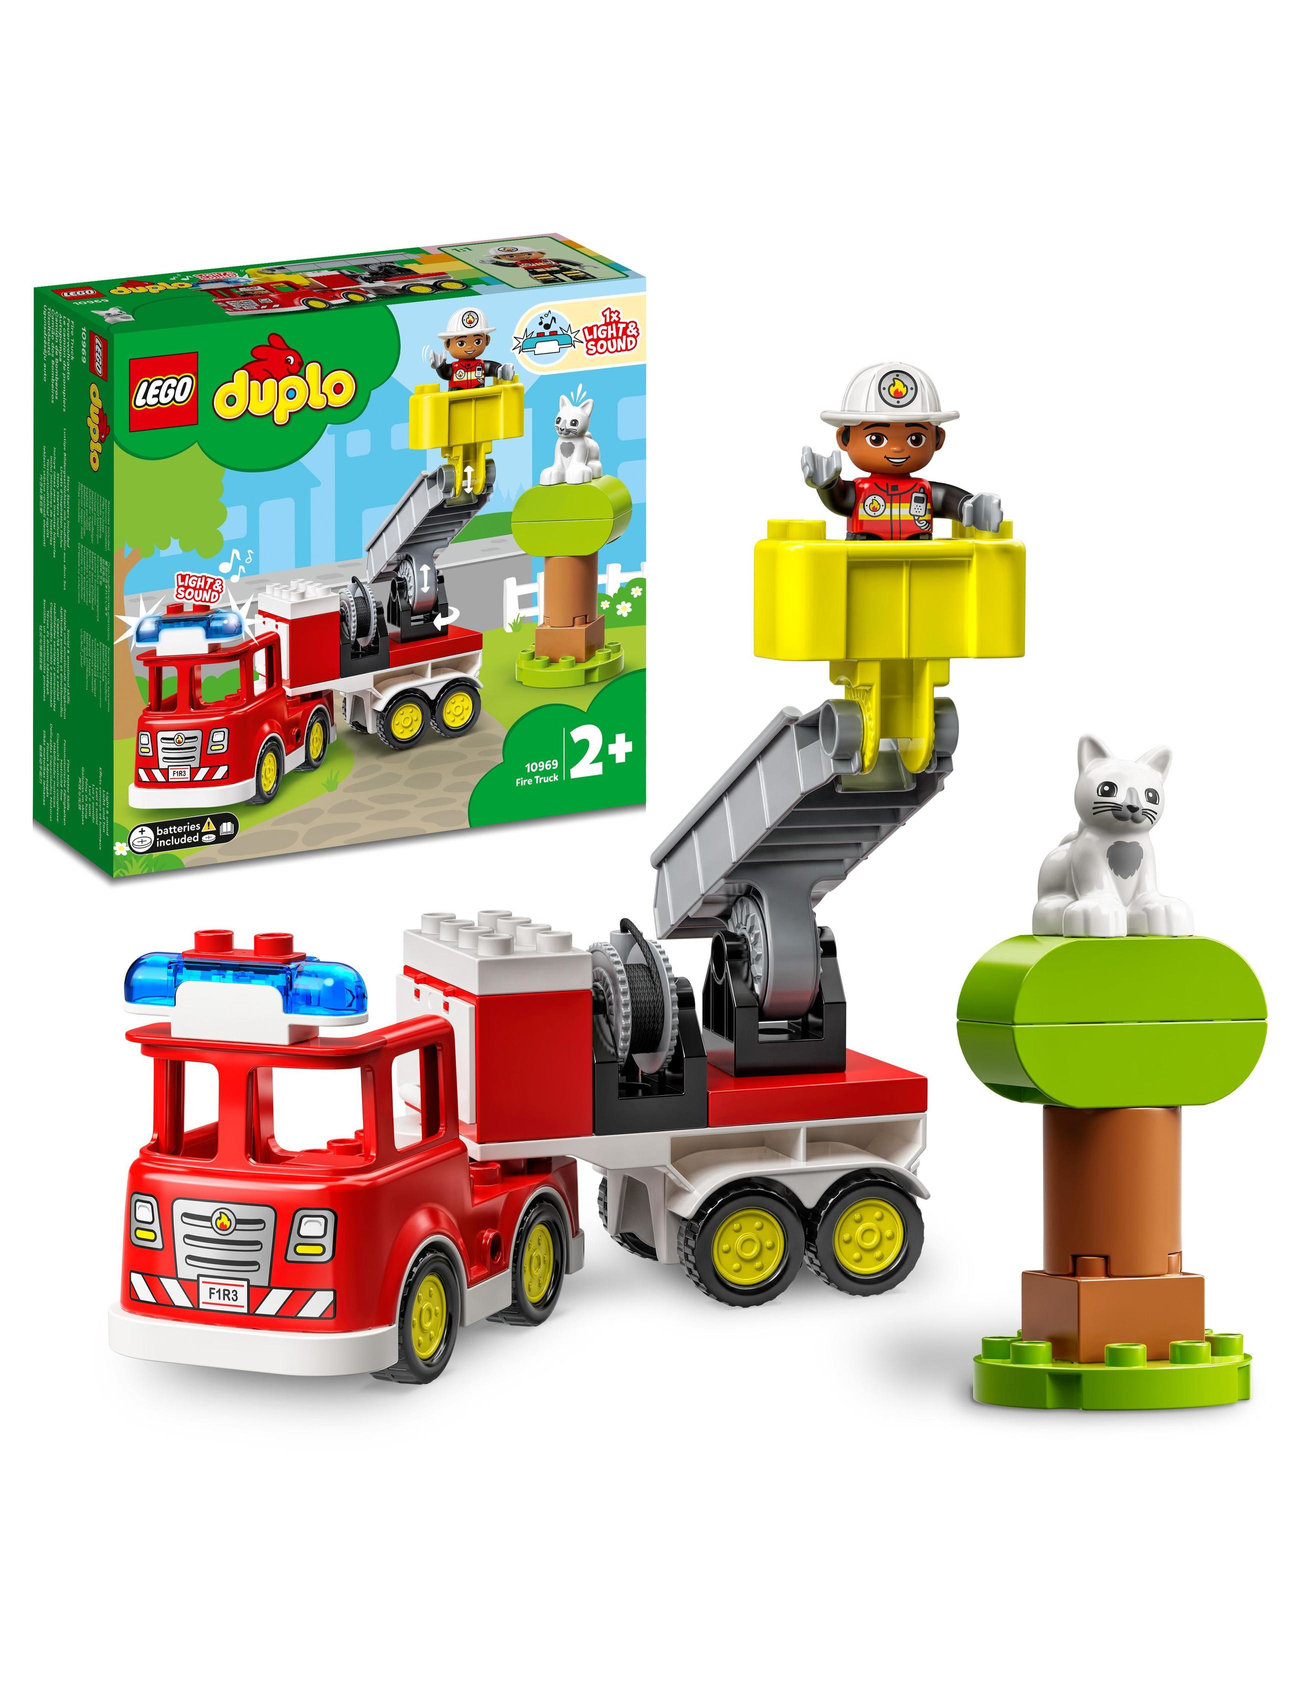 Town Fire Engine Toy For 2 Year Olds Toys Lego Toys Lego duplo Multi/patterned LEGO